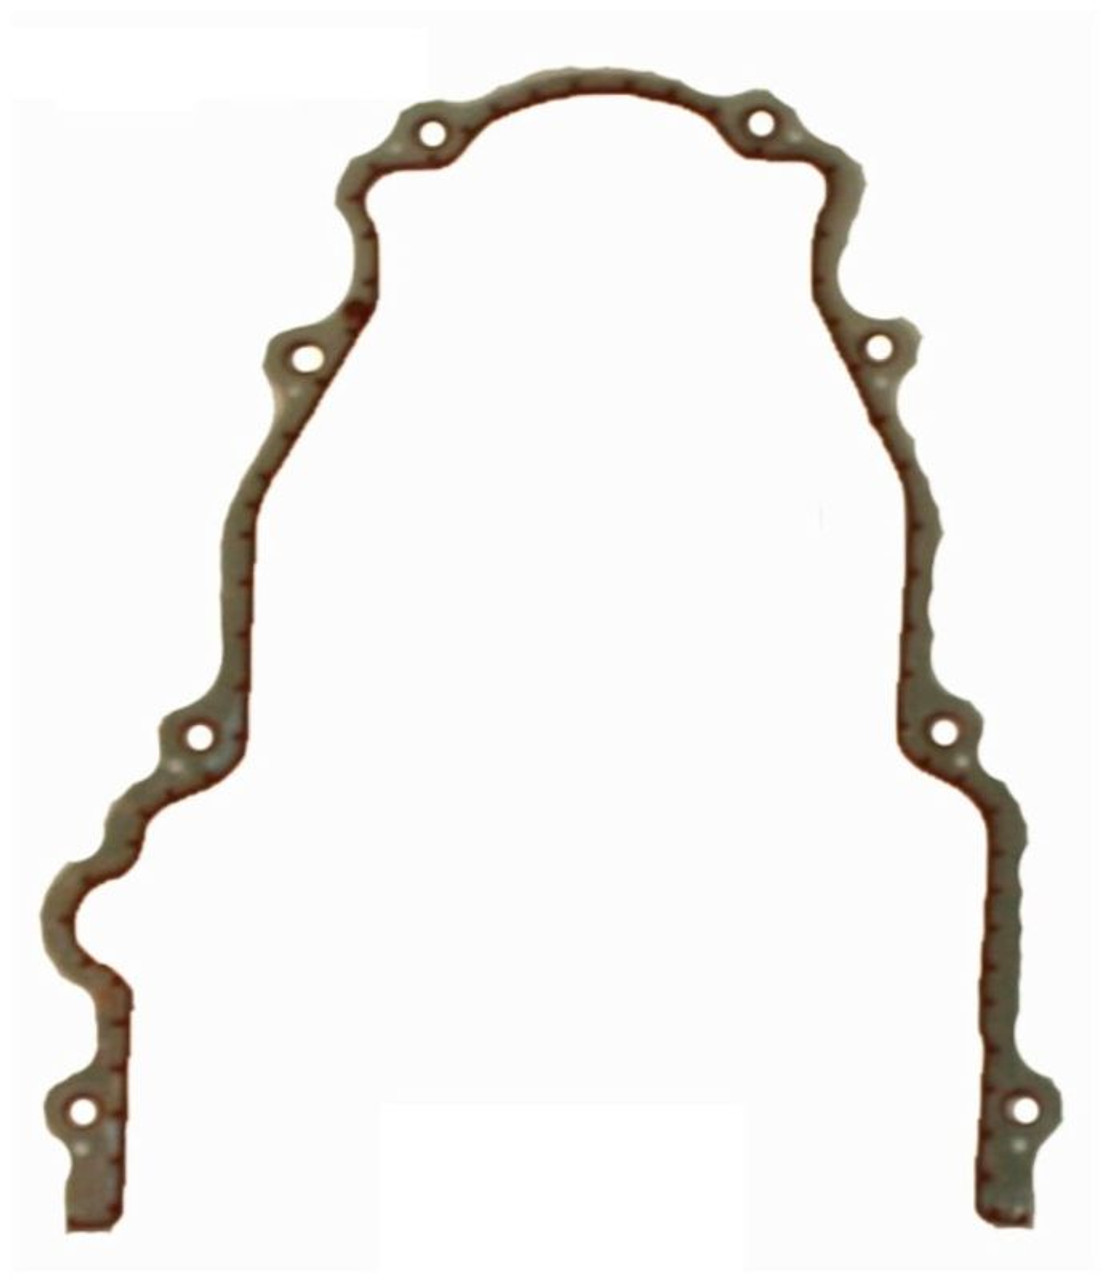 2009 Saab 9-7x 5.3L Engine Timing Cover Gasket TCG293-A -630